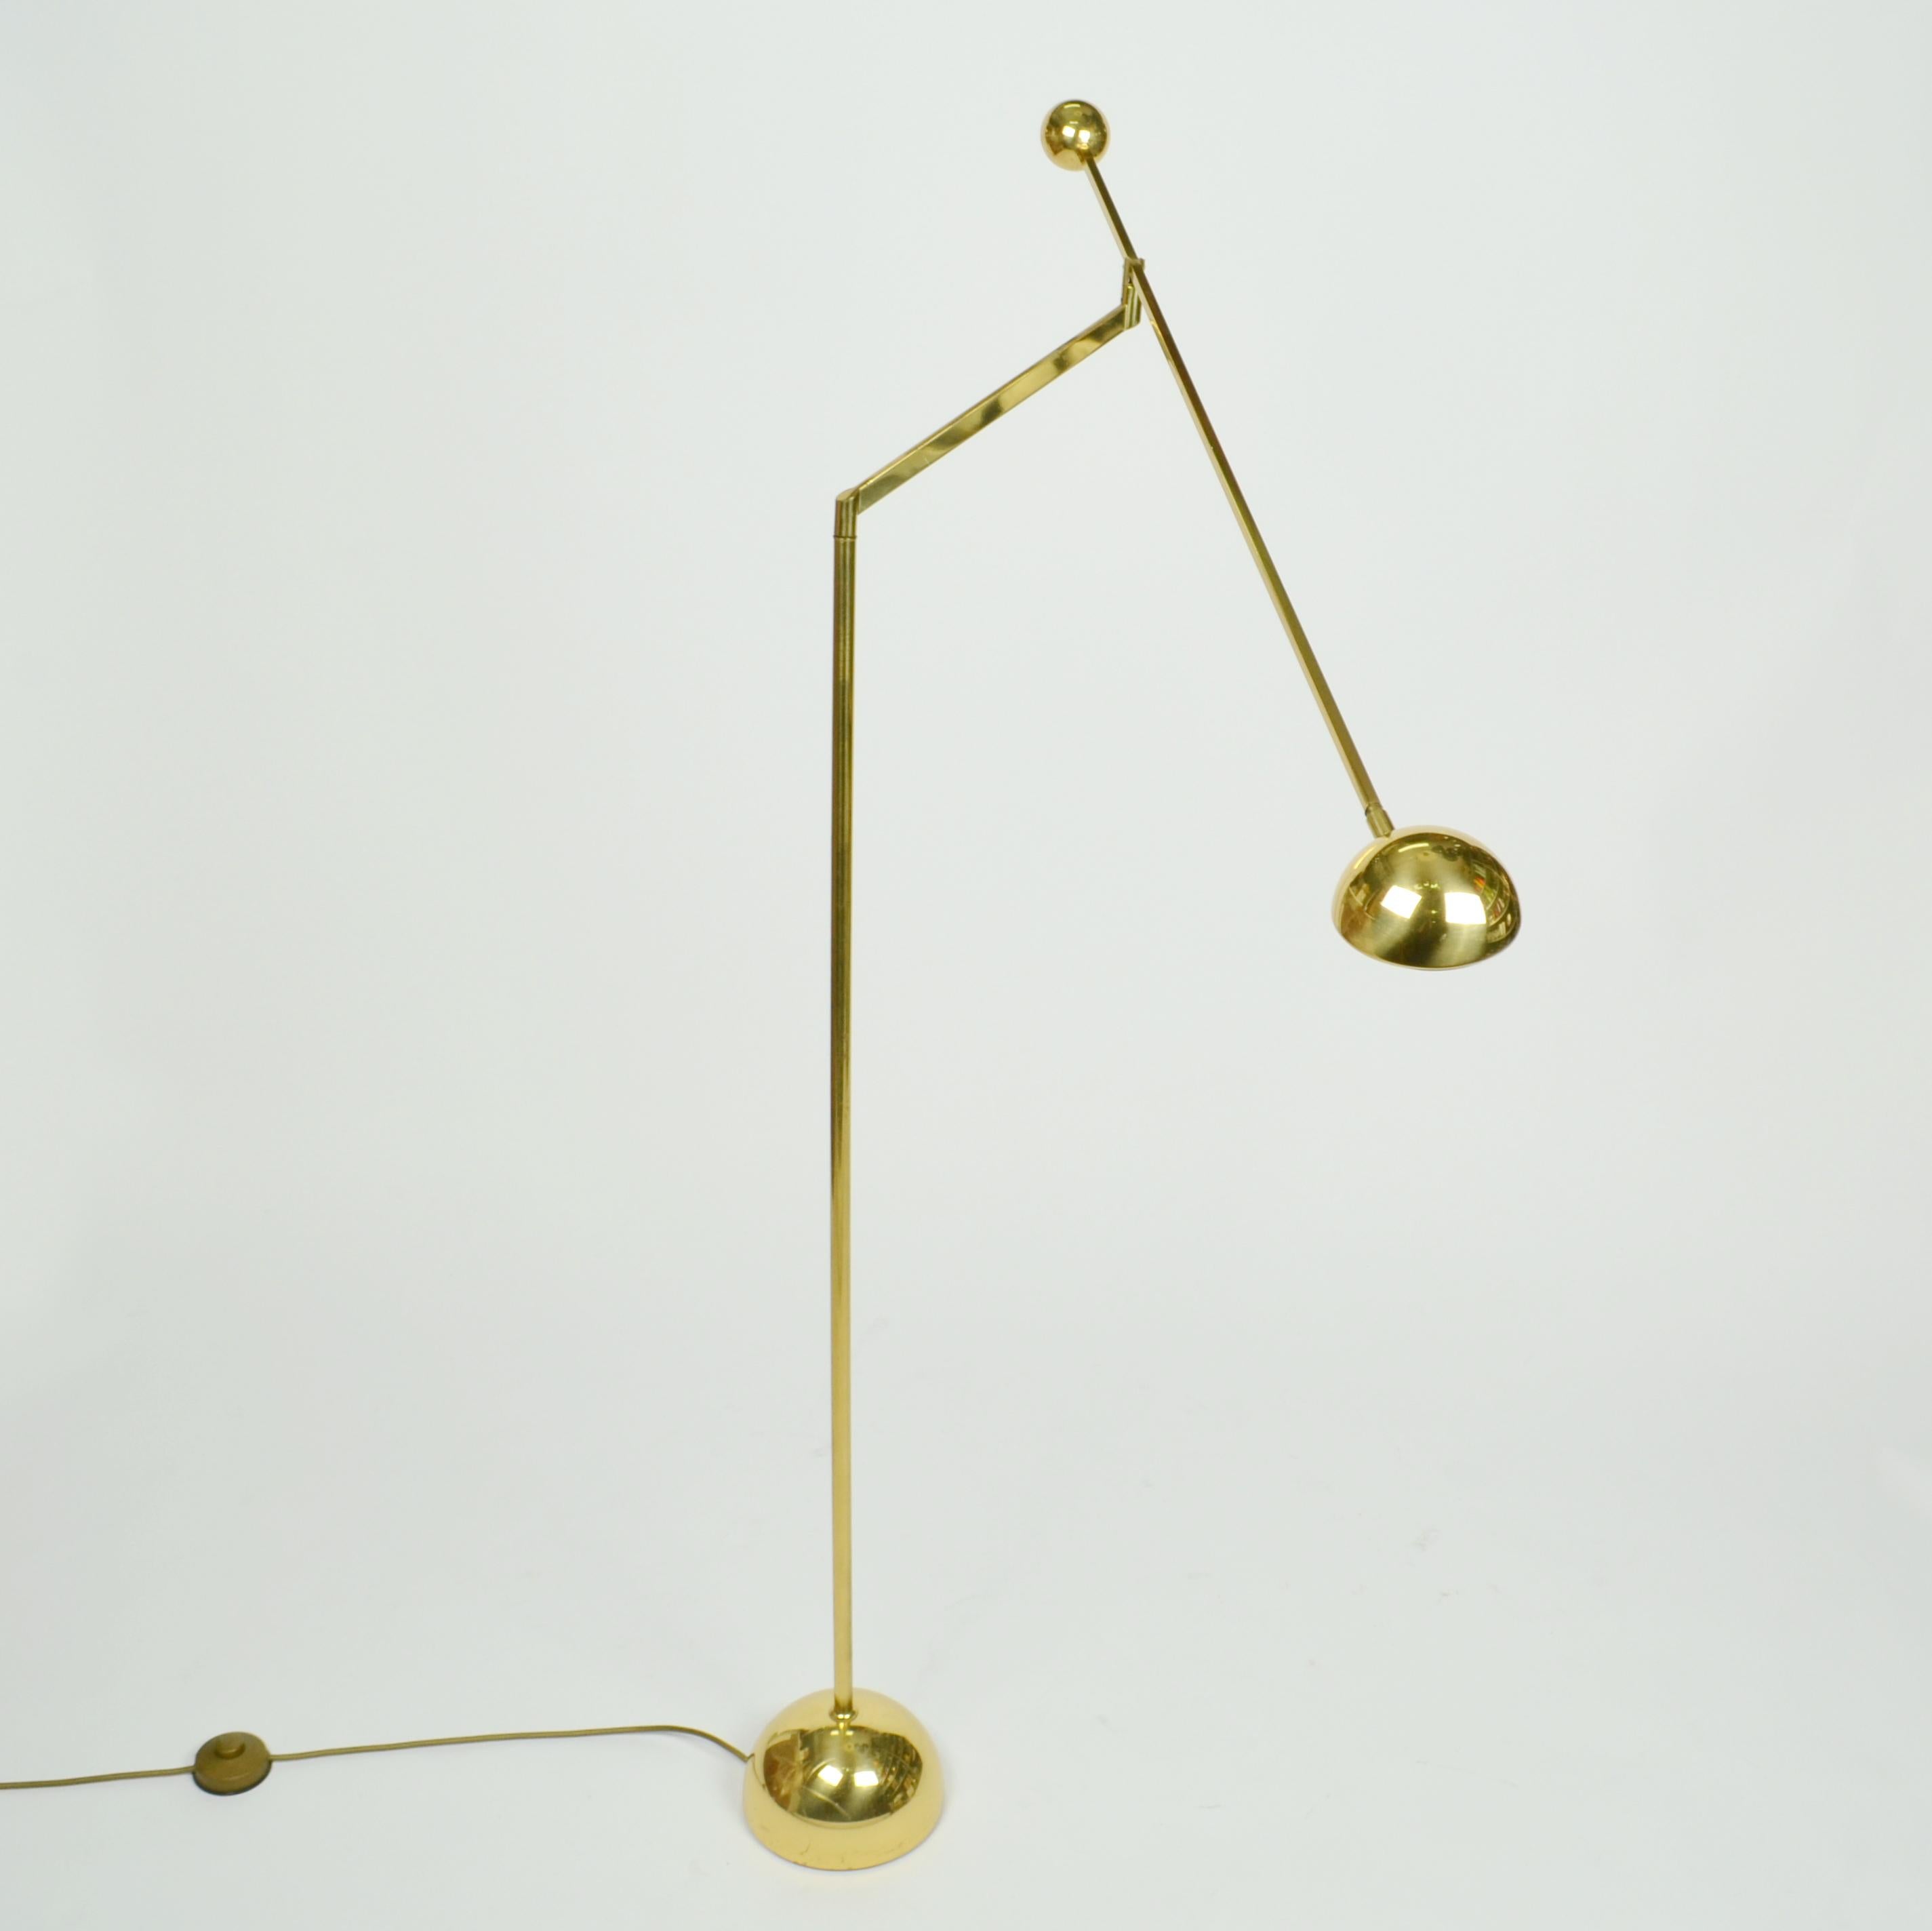 Minimalist counterbalance floor lamp is super flexible, with an arm adjustable to almost 180 degrees. The halogen light source is attached to a long arm holding a spherical counter weight. The arm sits on an angled stand with counter balance which